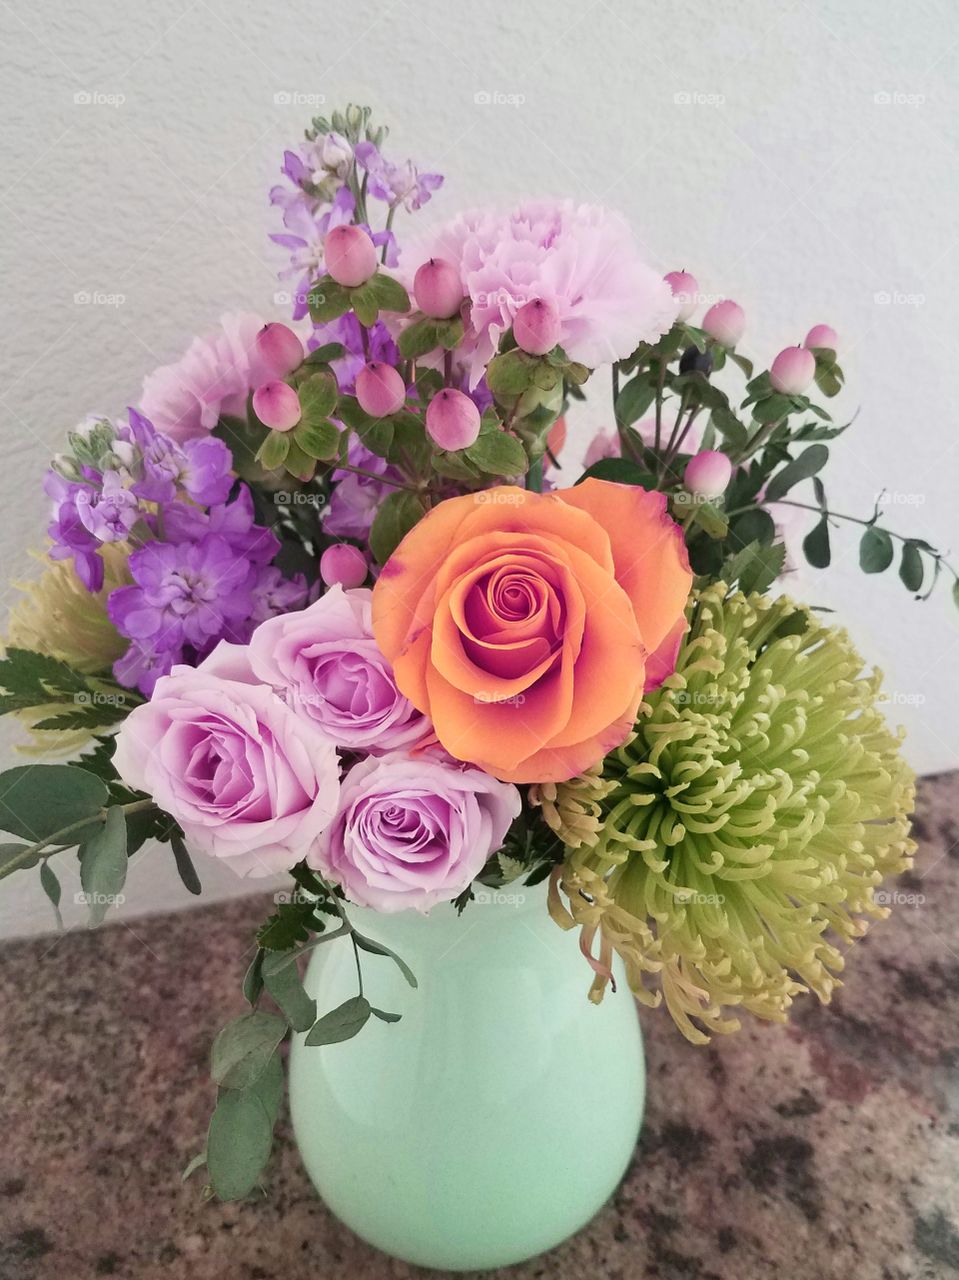 A summer bouquet  of roses and other flowers